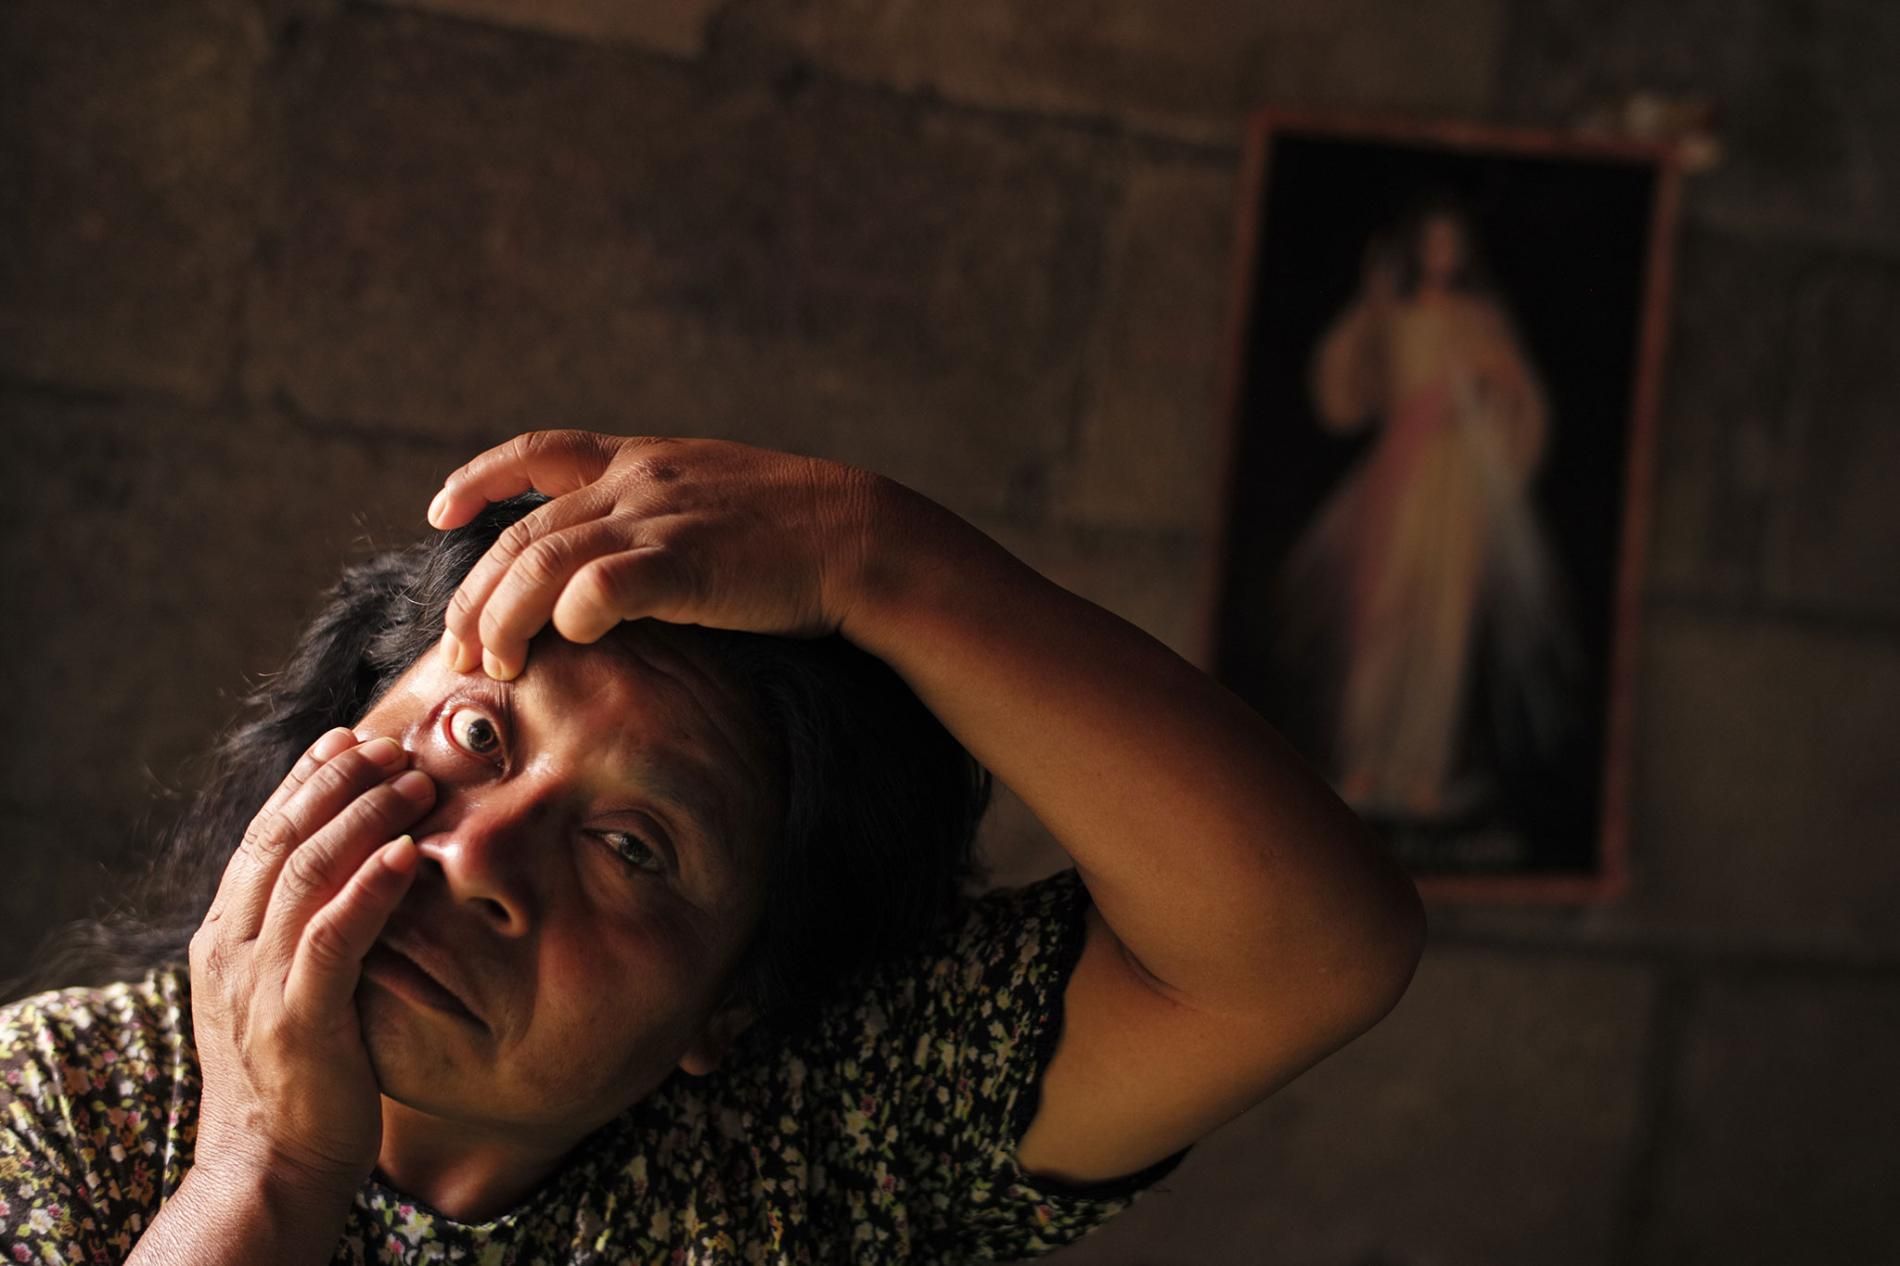 But the López family's new stove is unventilated, so the smoke still pours into the kitchen, where Tania's mother and grandmother also do their weaving. Her grandmother Augustina has swollen, burning eyes. Image by Lynn Johnson. Guatemala, 2017.